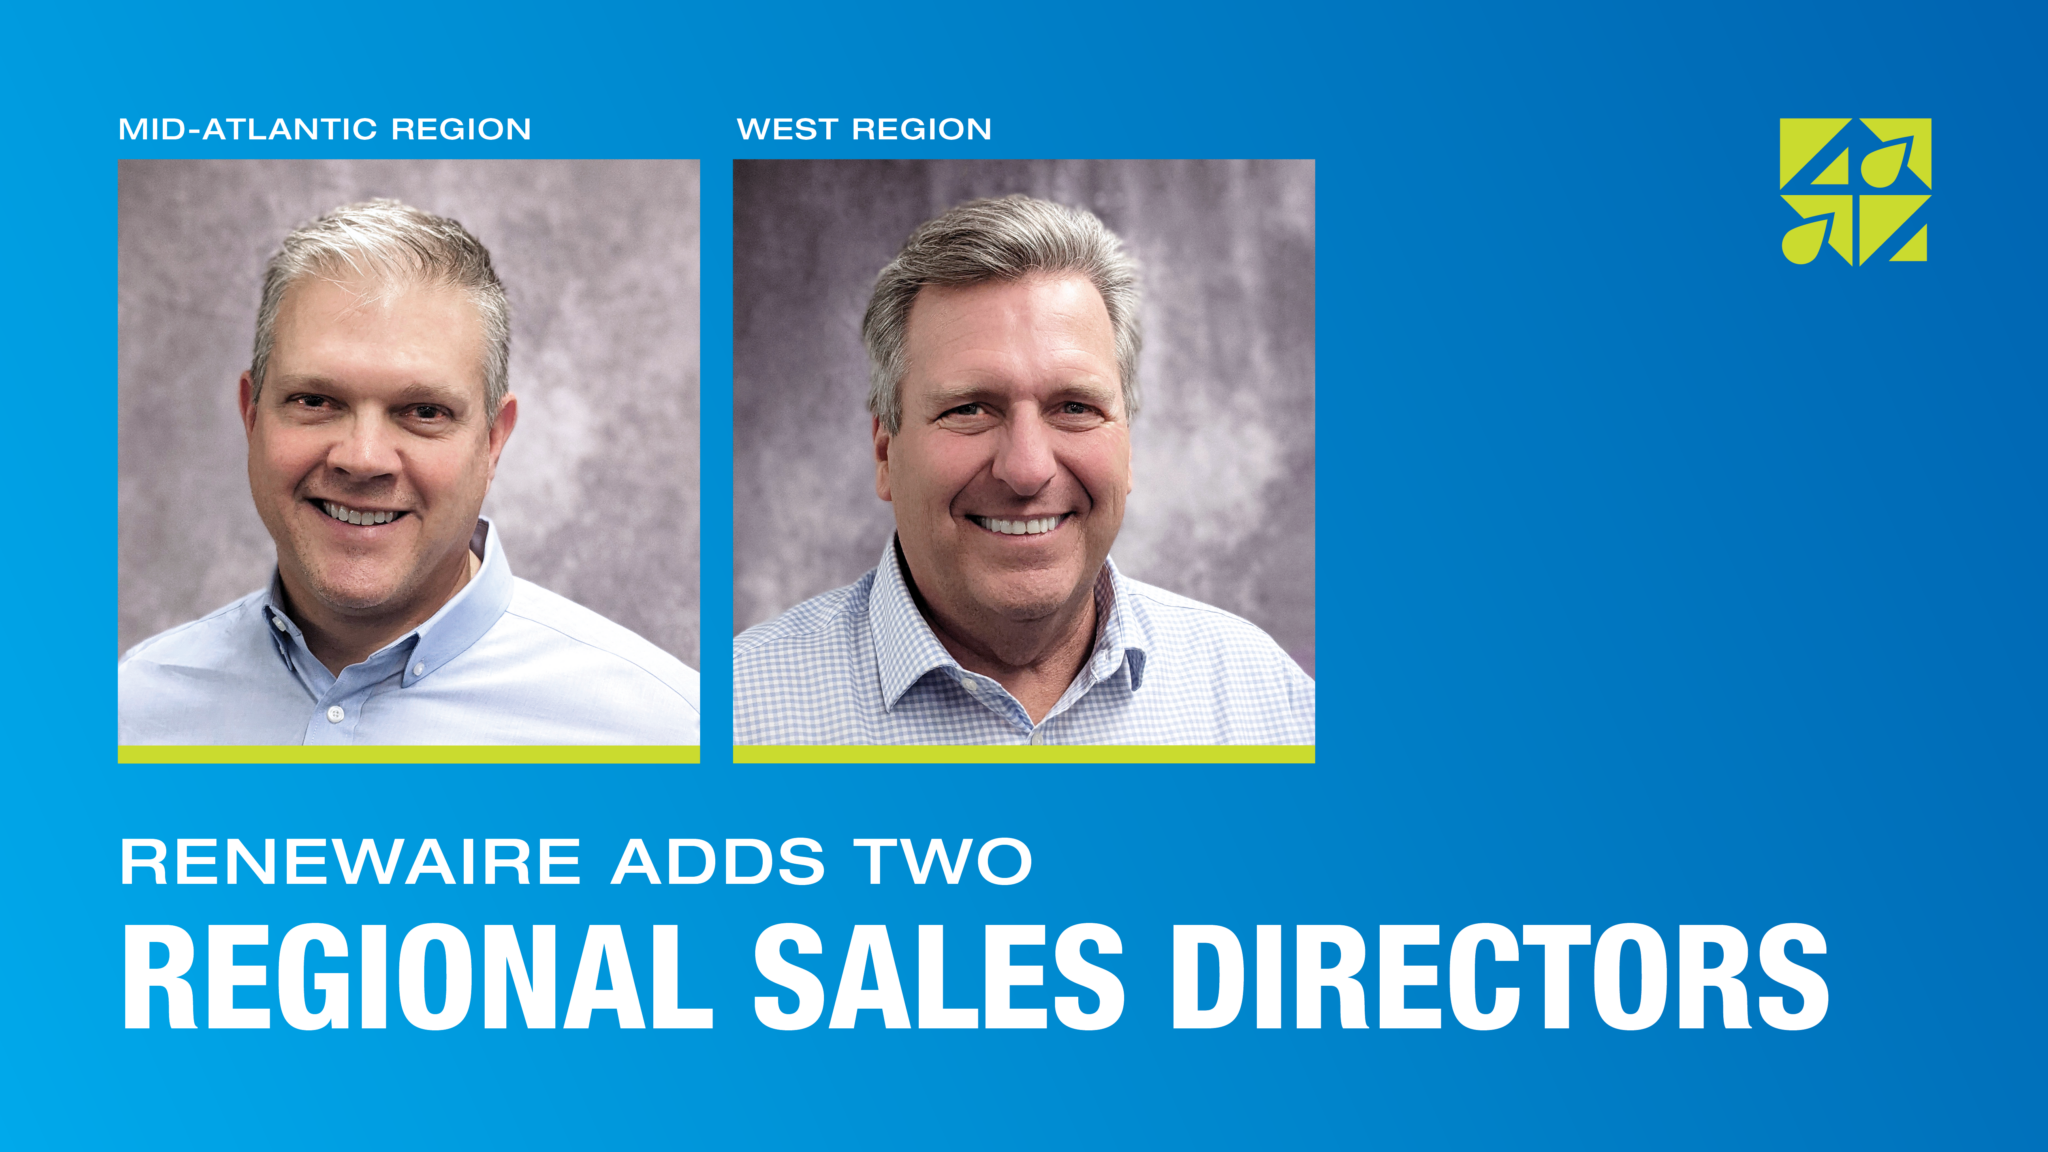 MIKE DELWICHE AND CRAIG LaFONTAINE TO OVERSEE RENEWAIRE MID-ATLANTIC AND WEST REGIONS